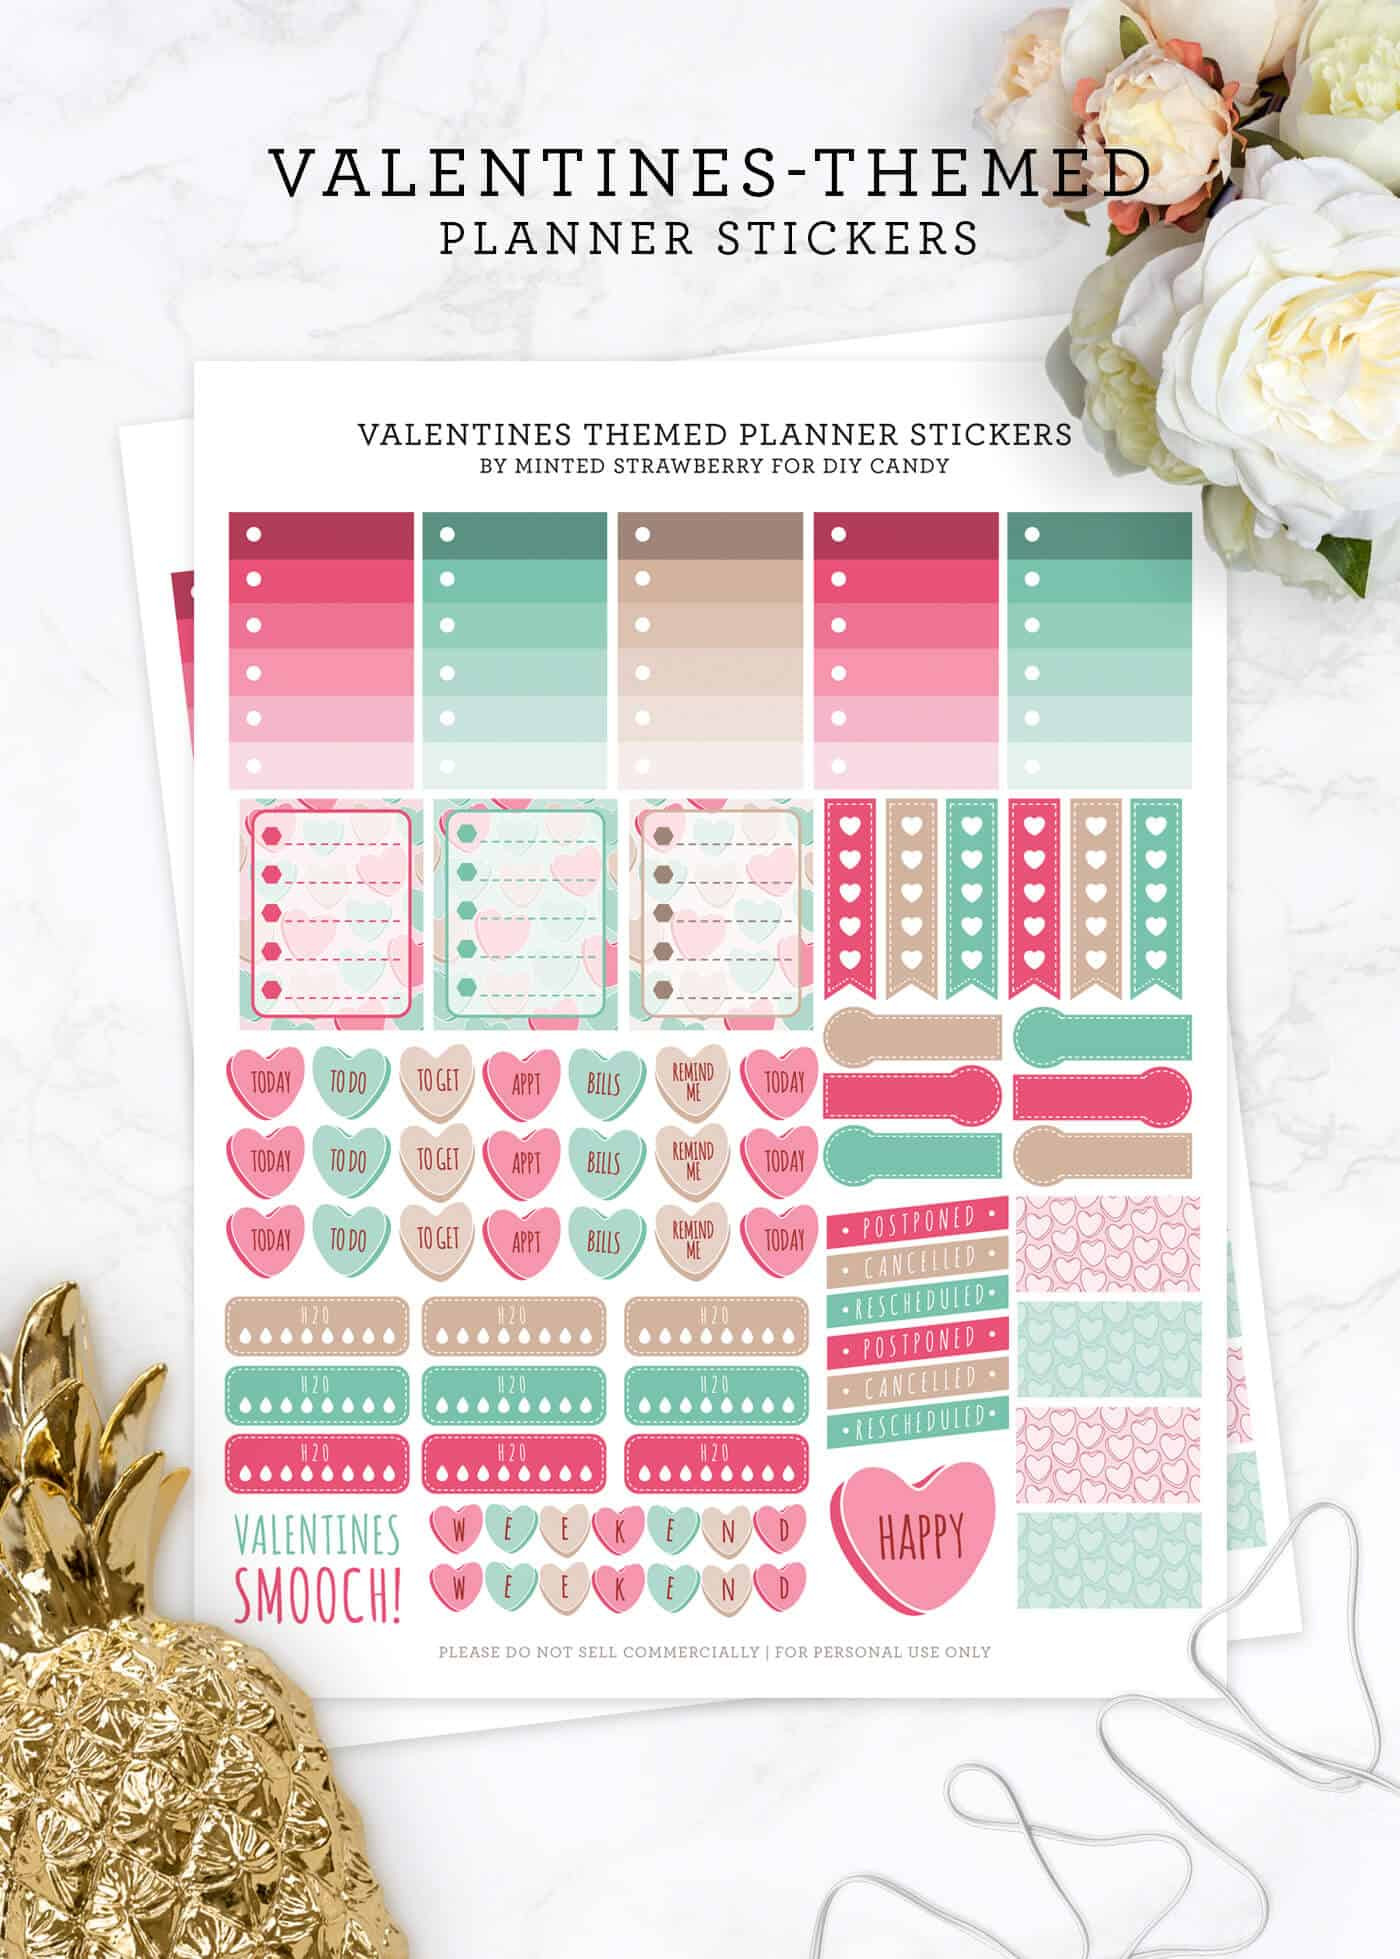 DIY Planner Stickers
 Free Valentines Themed Stickers for Planners DIY Candy